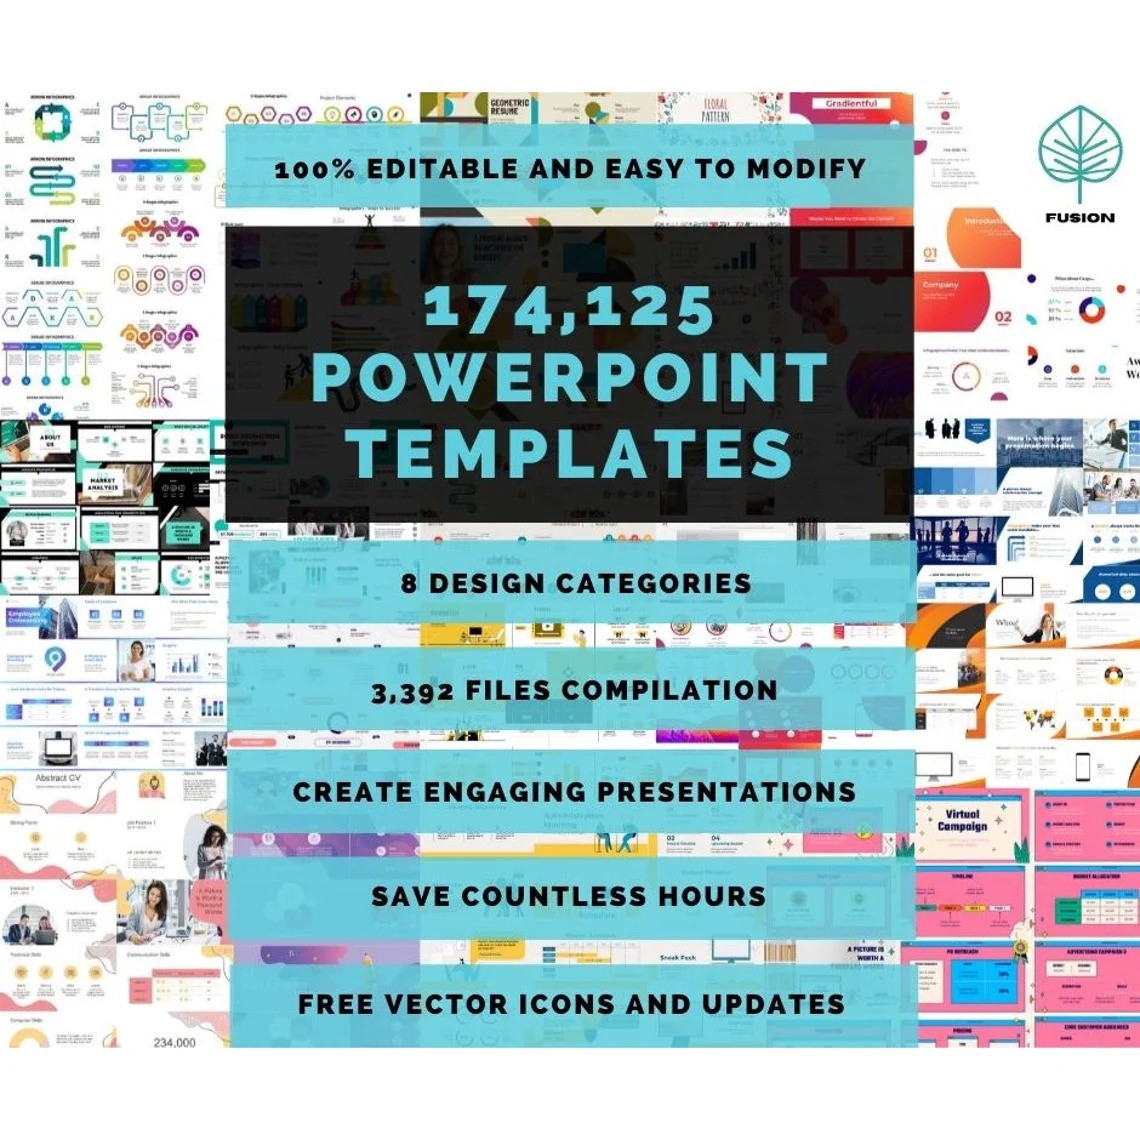 174,125 PowerPoint Template Design: Your One-Stop Solution for ...